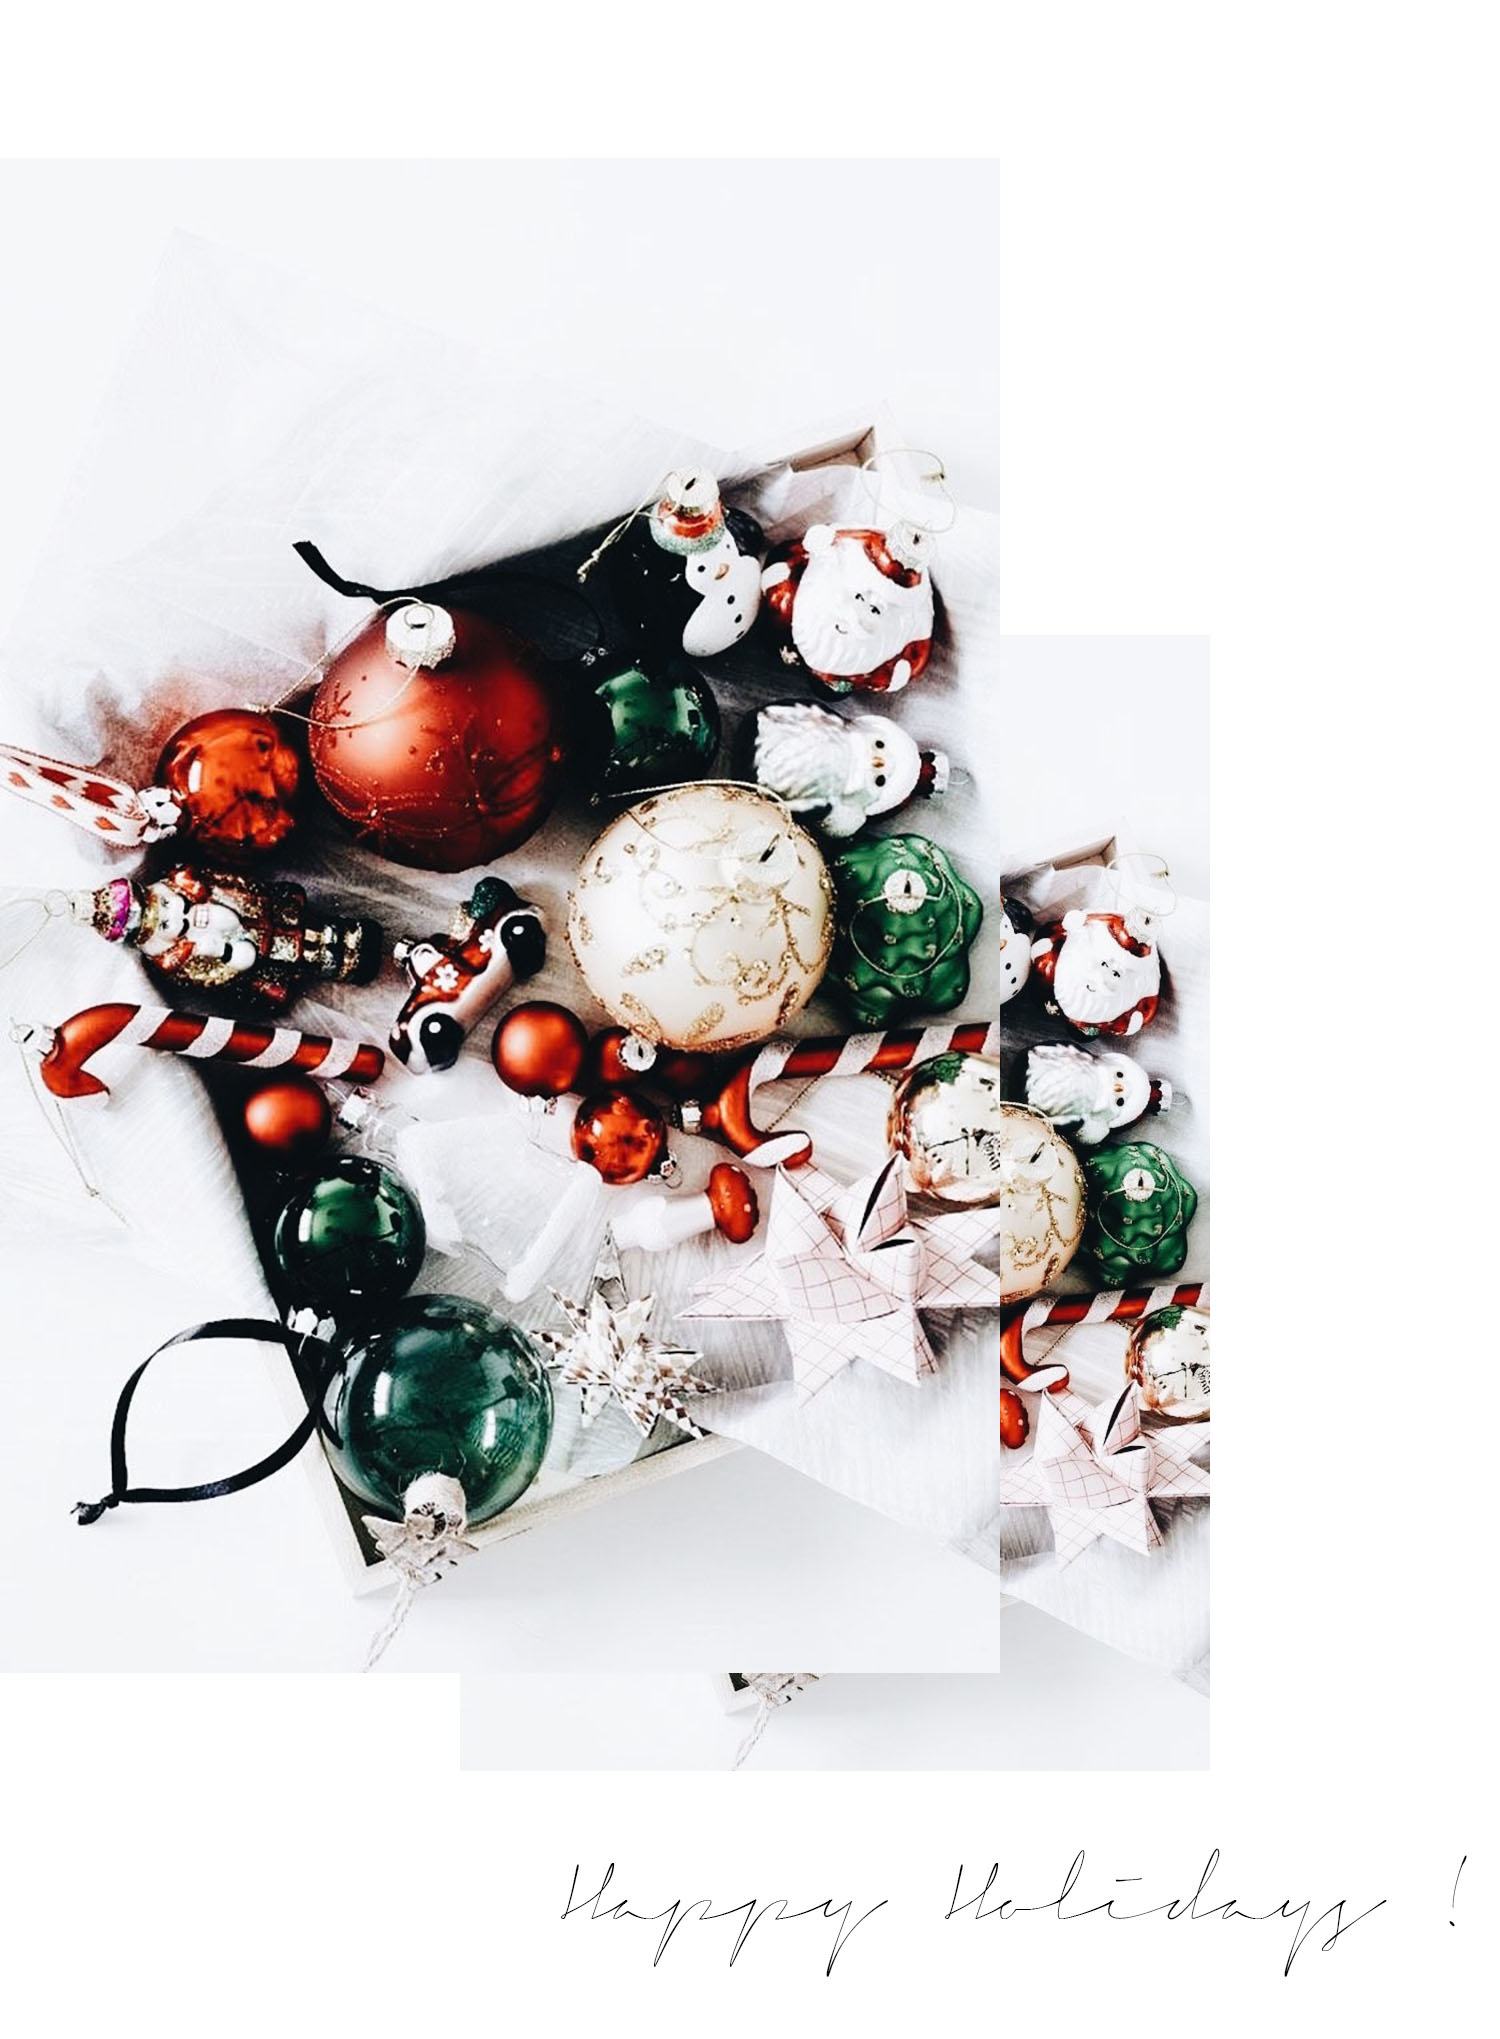 Winnipeg fashion blogger Cee Fardoe of Coco & Vera wishes her readers happy holidays for 2017 with red, white and green vintage Christmas ornaments